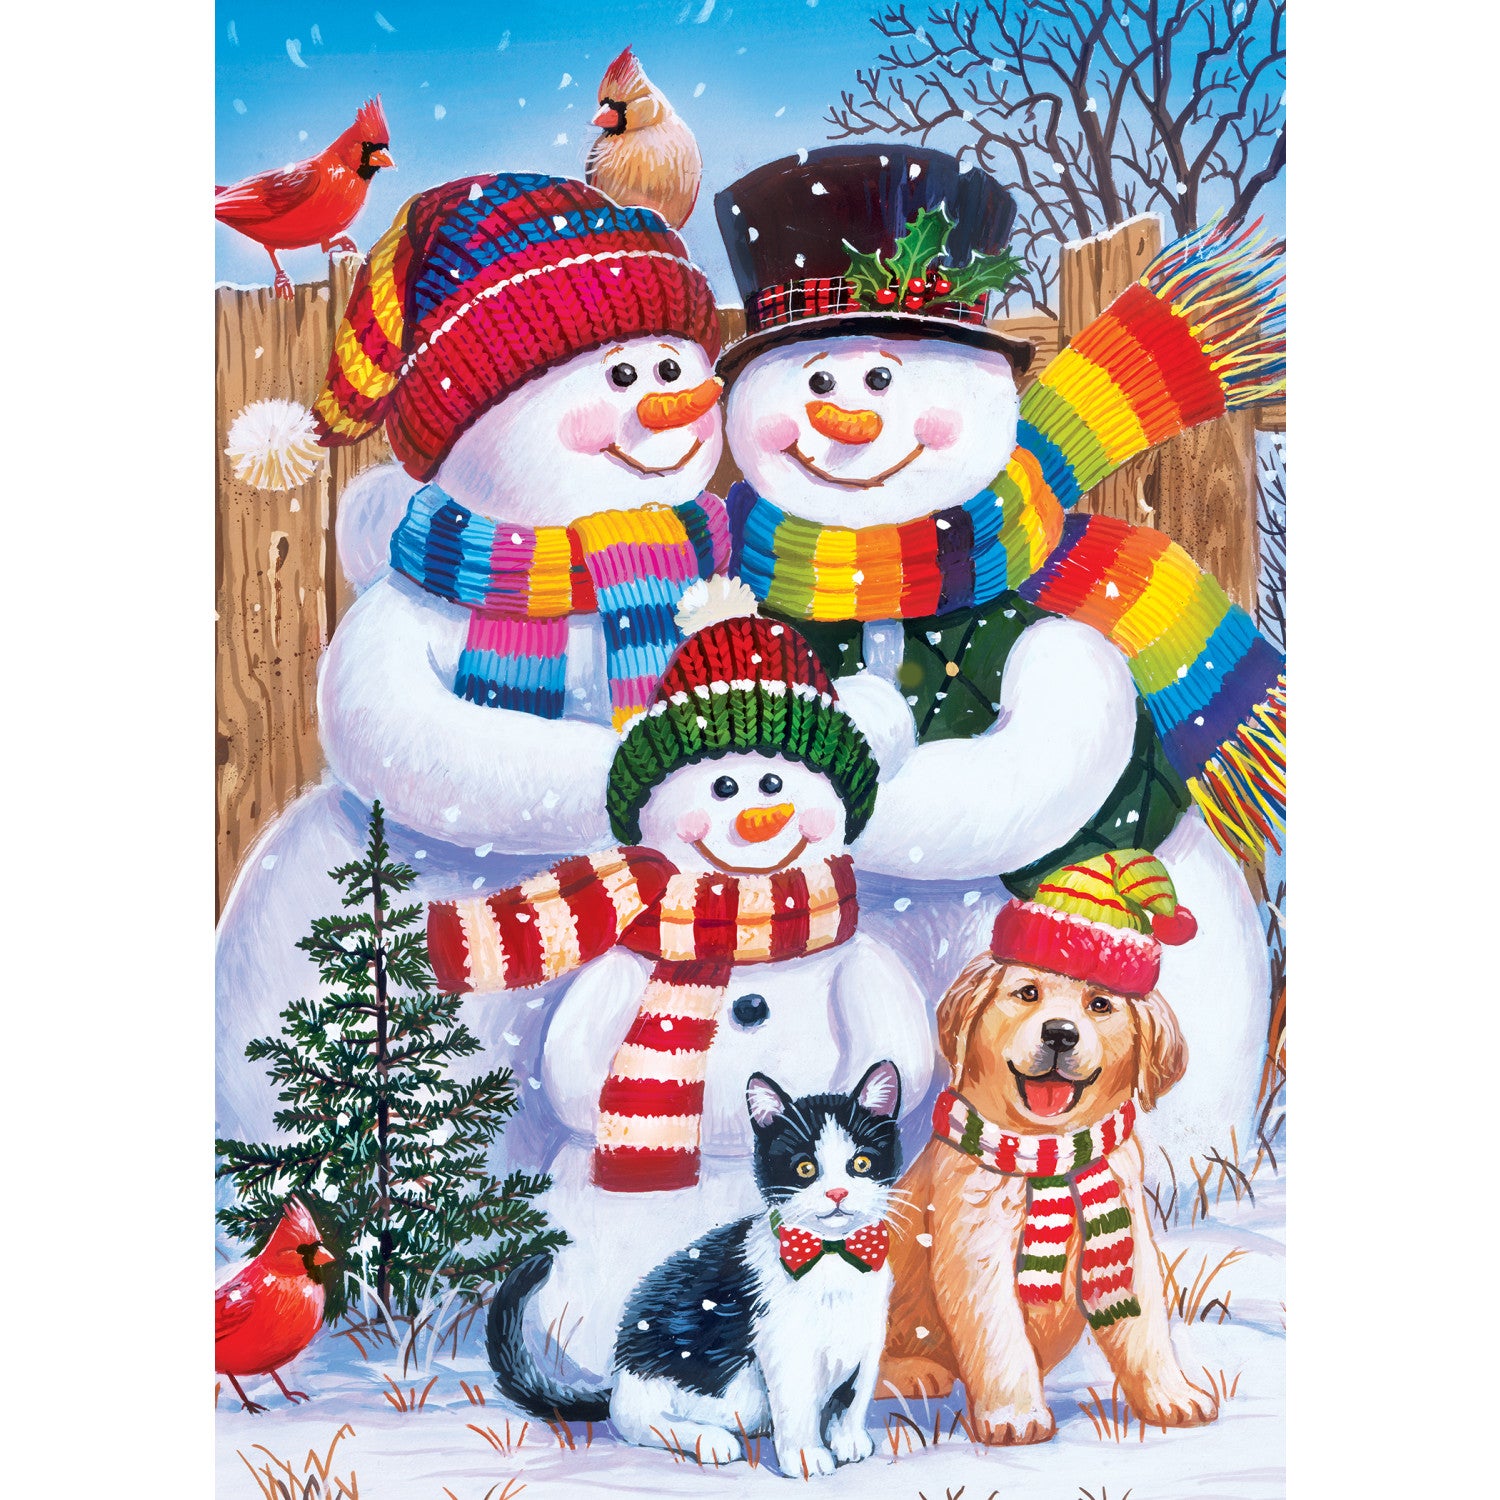 Holiday Glitter Christmas- Family Portrait 500 Piece Puzzle